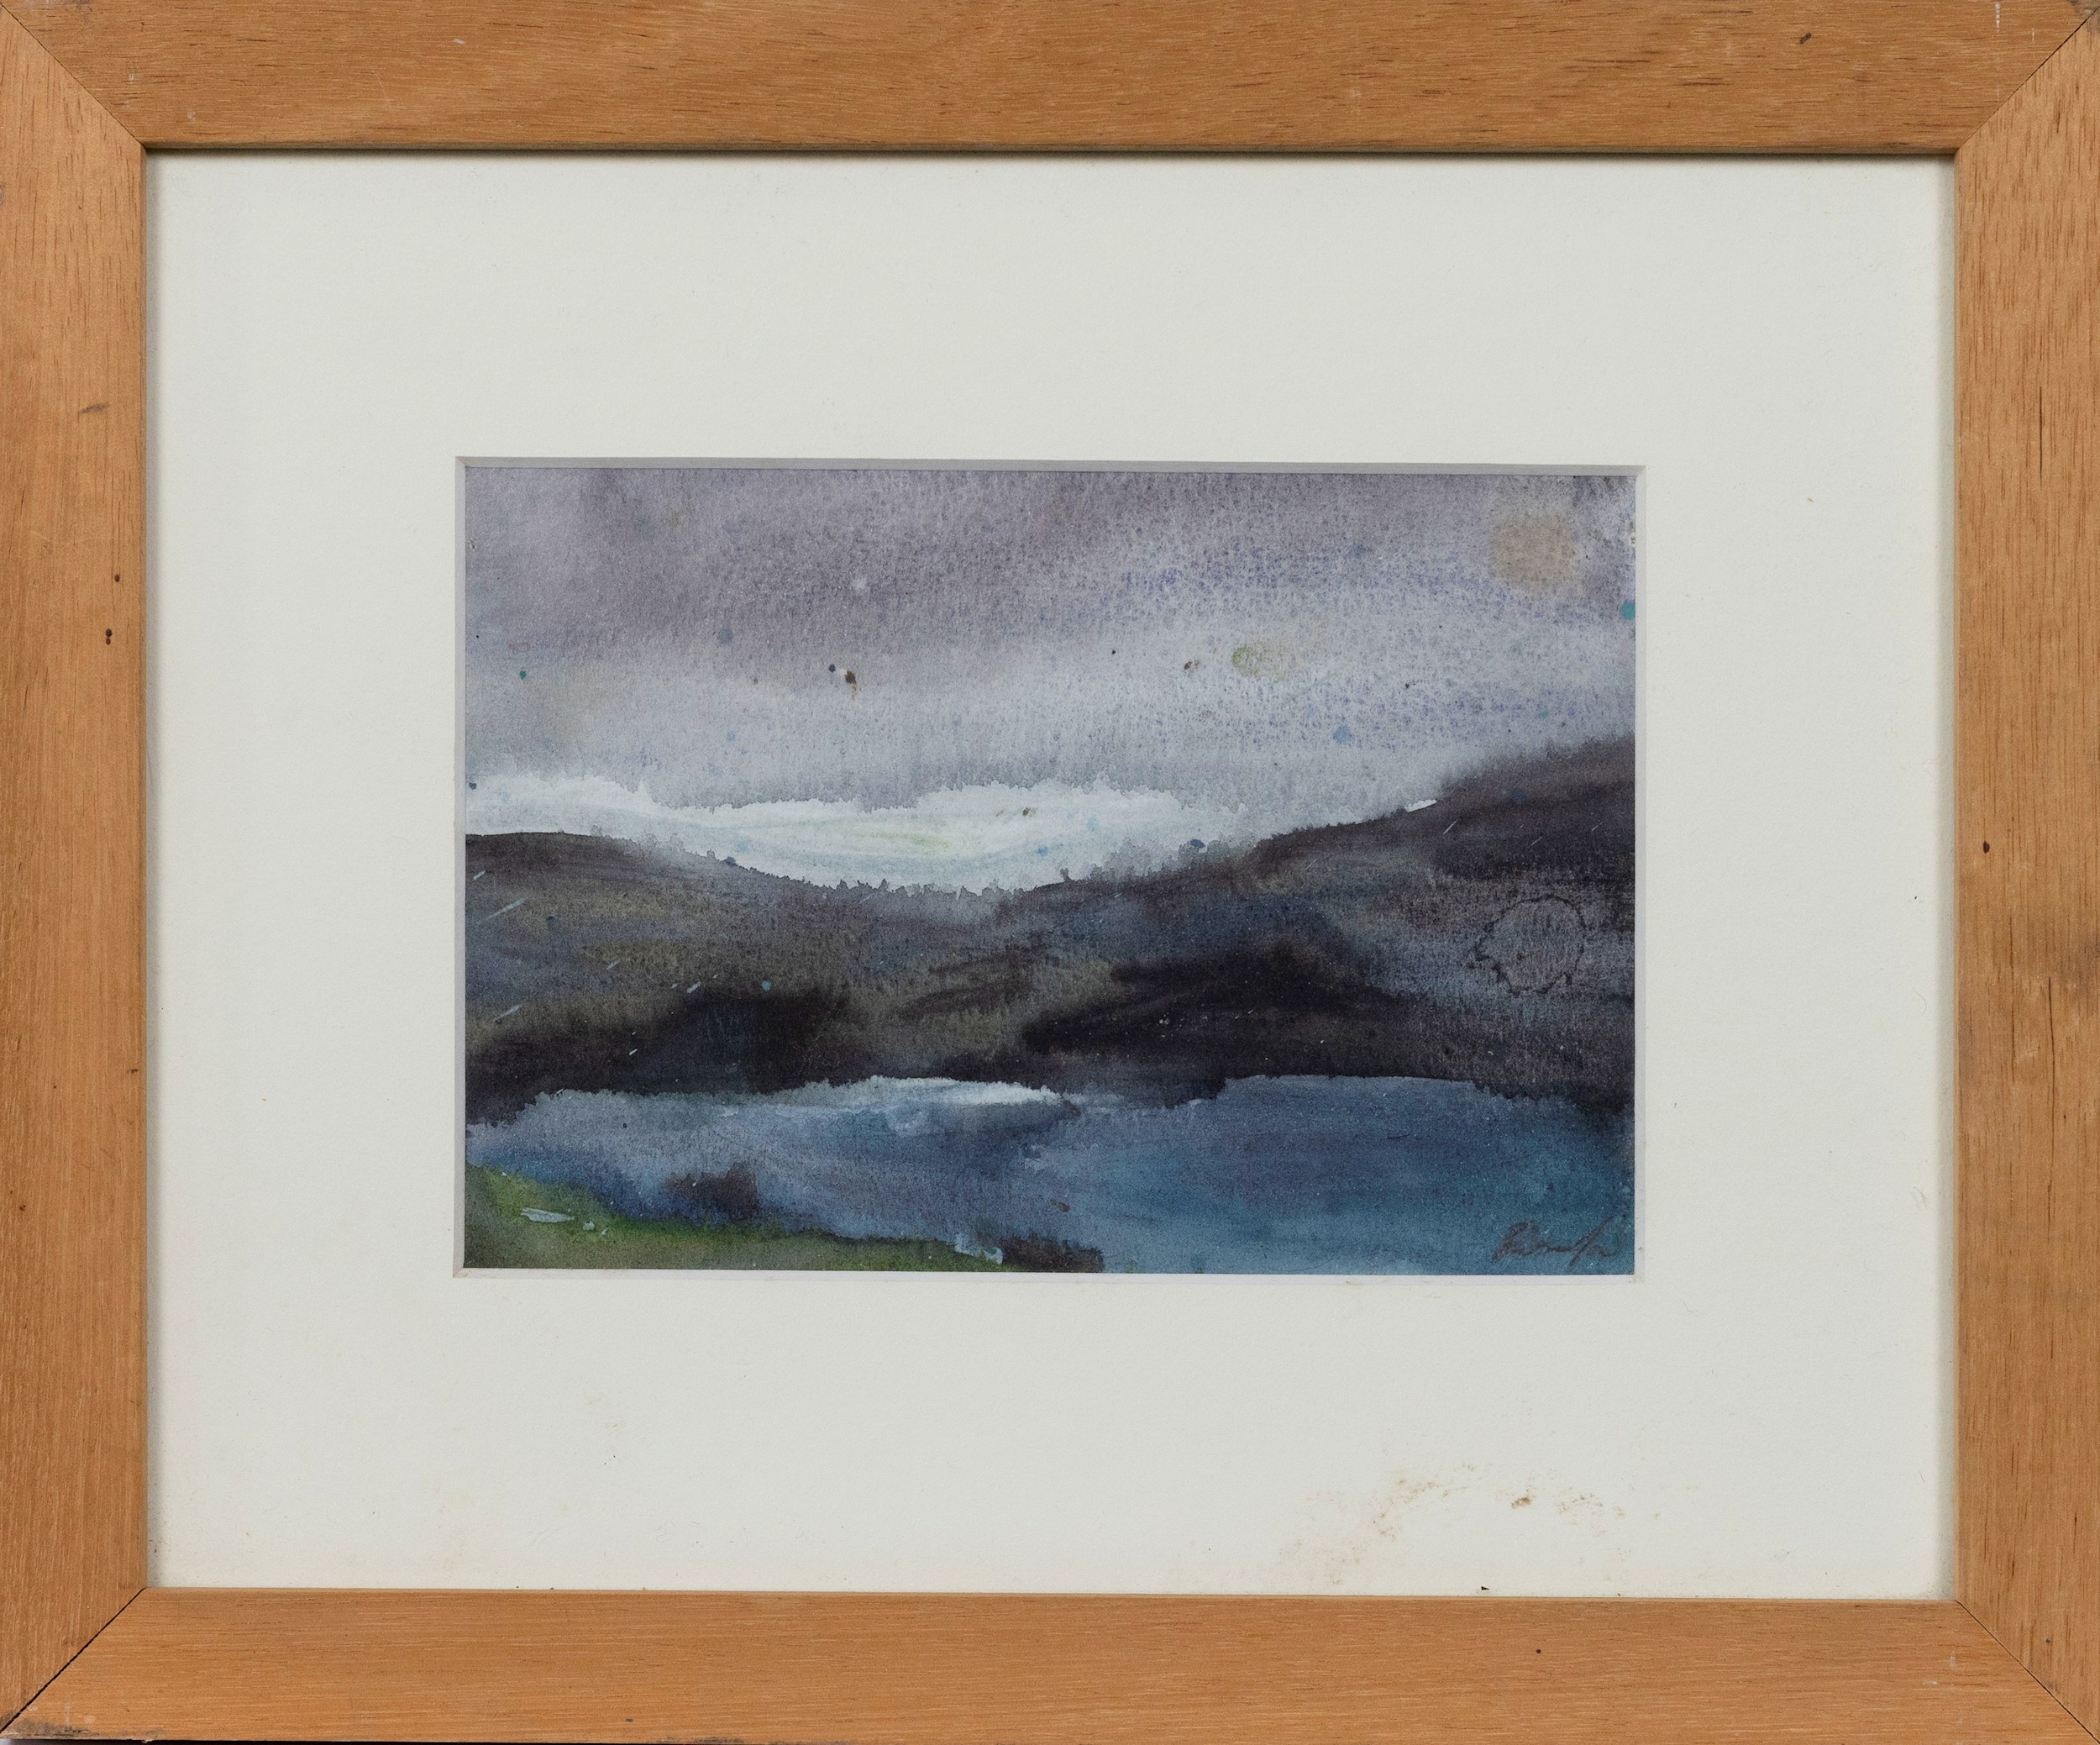 Pandora Mond (Scottish, b.1959), Mountain landscape. oil on board, signed lower right. 4 5/8 x 6½in. - Image 2 of 2